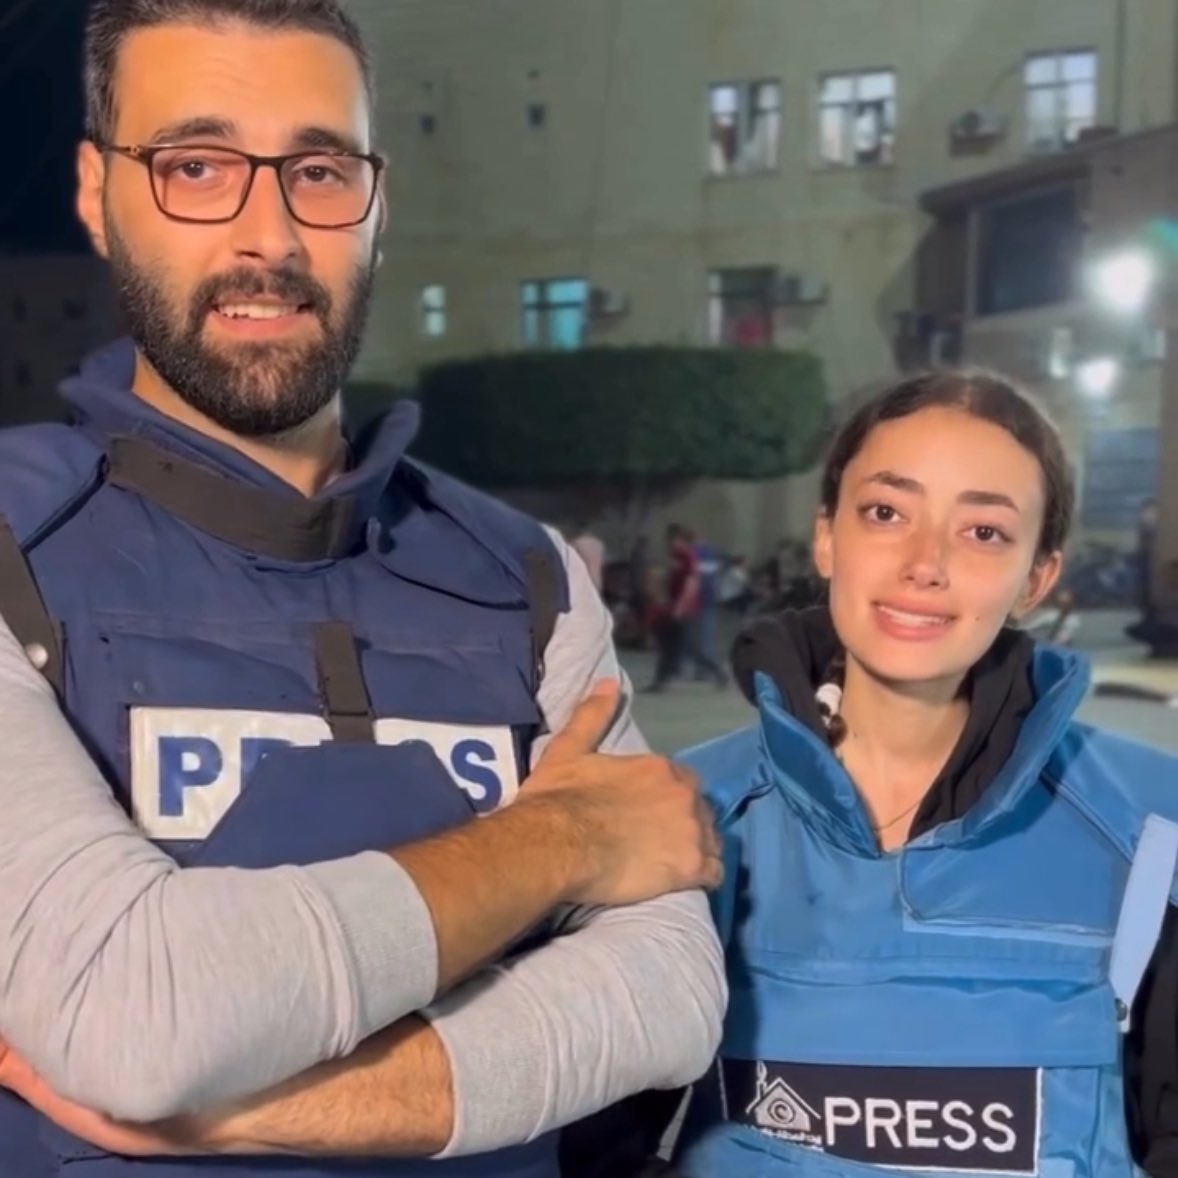 Journalists are reporting heroically in Gaza and risking their lives for one purpose, to share what is happening openly. The world owes a lot to the journalists working in the region.